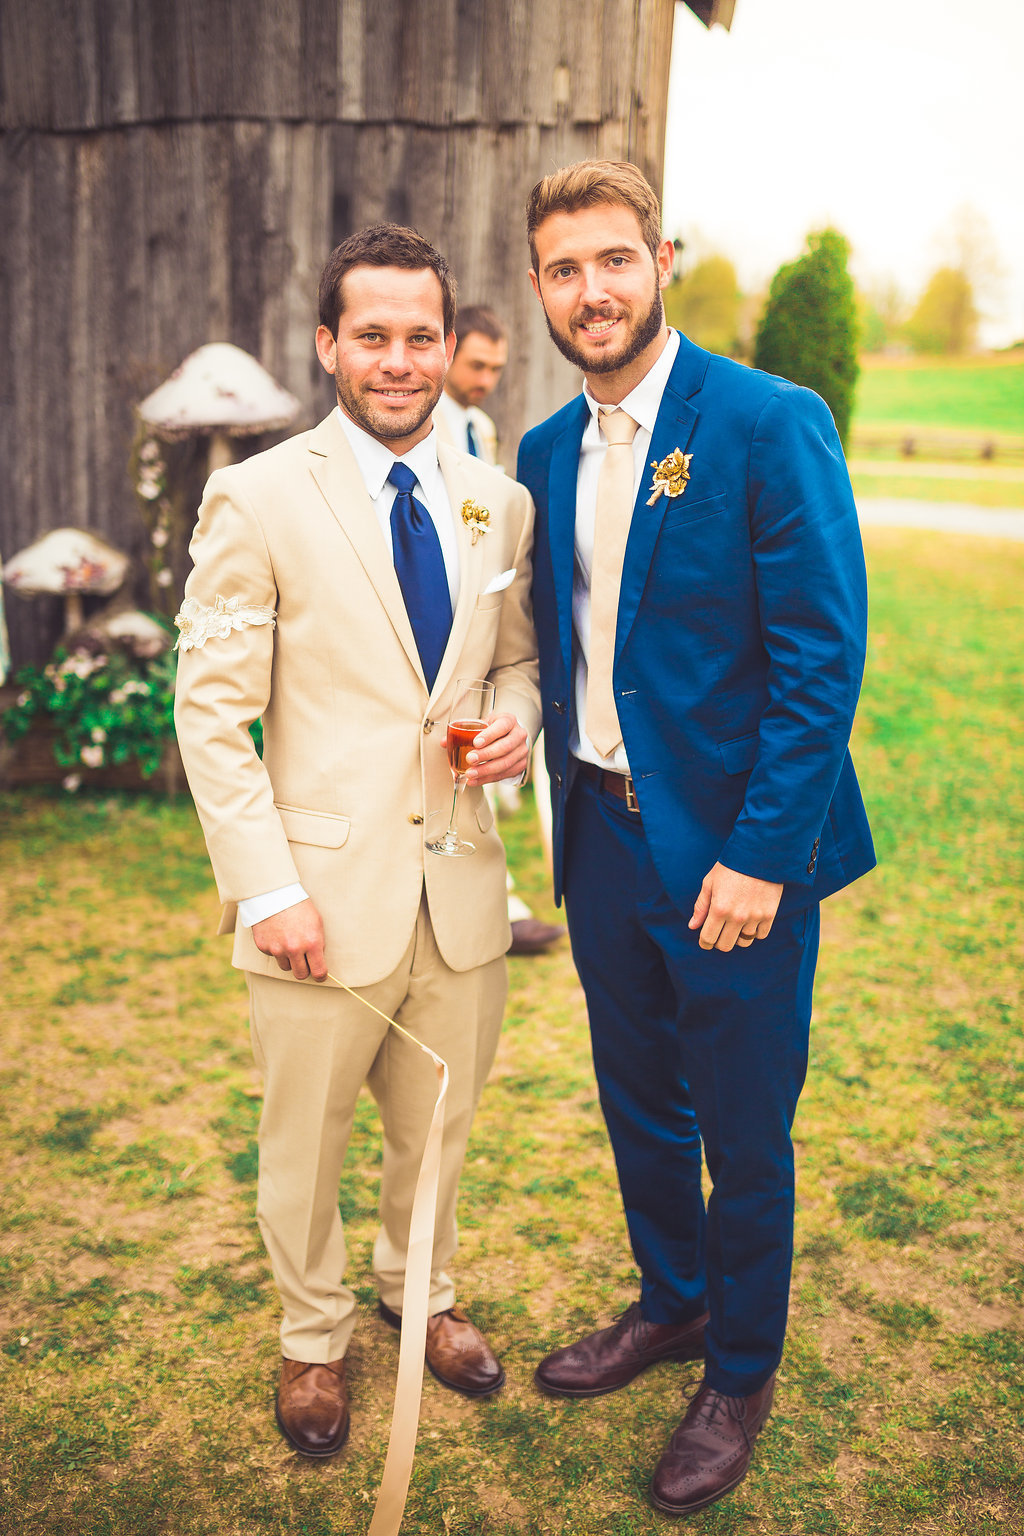 Wedding Photograph Of Groom in Blue Suit and Man in Light Brown Suit Los Angeles